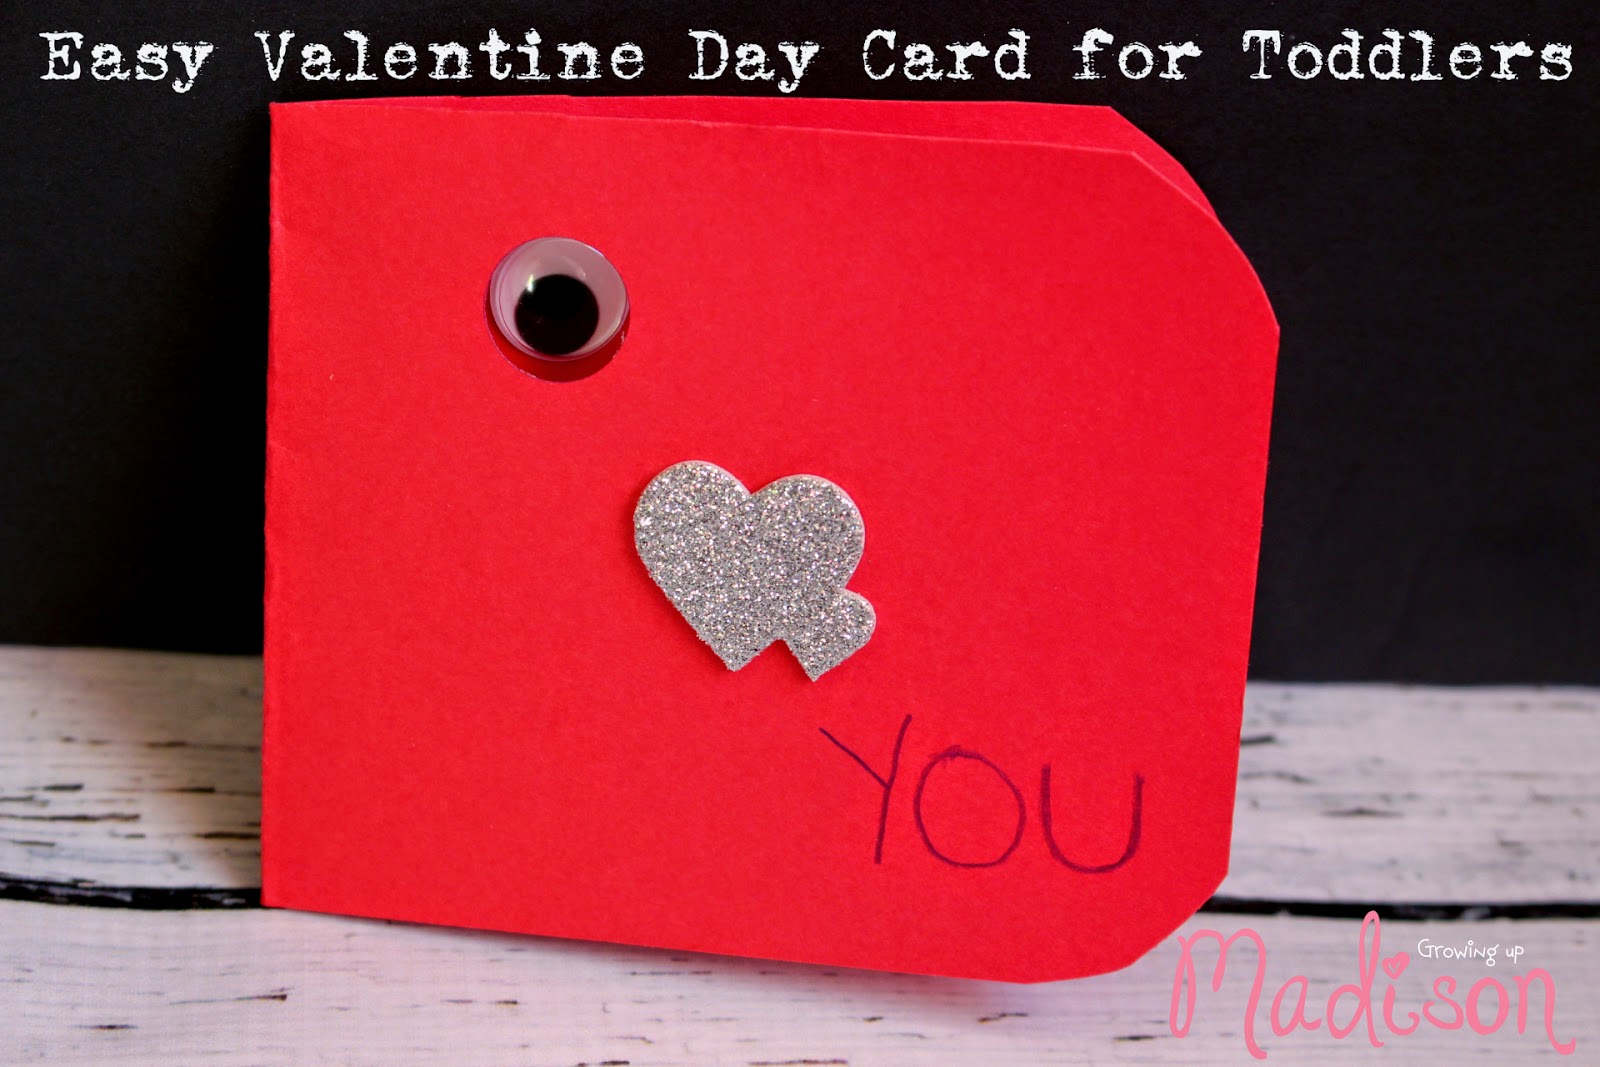 Easy Valentine Day Card for Toddlers